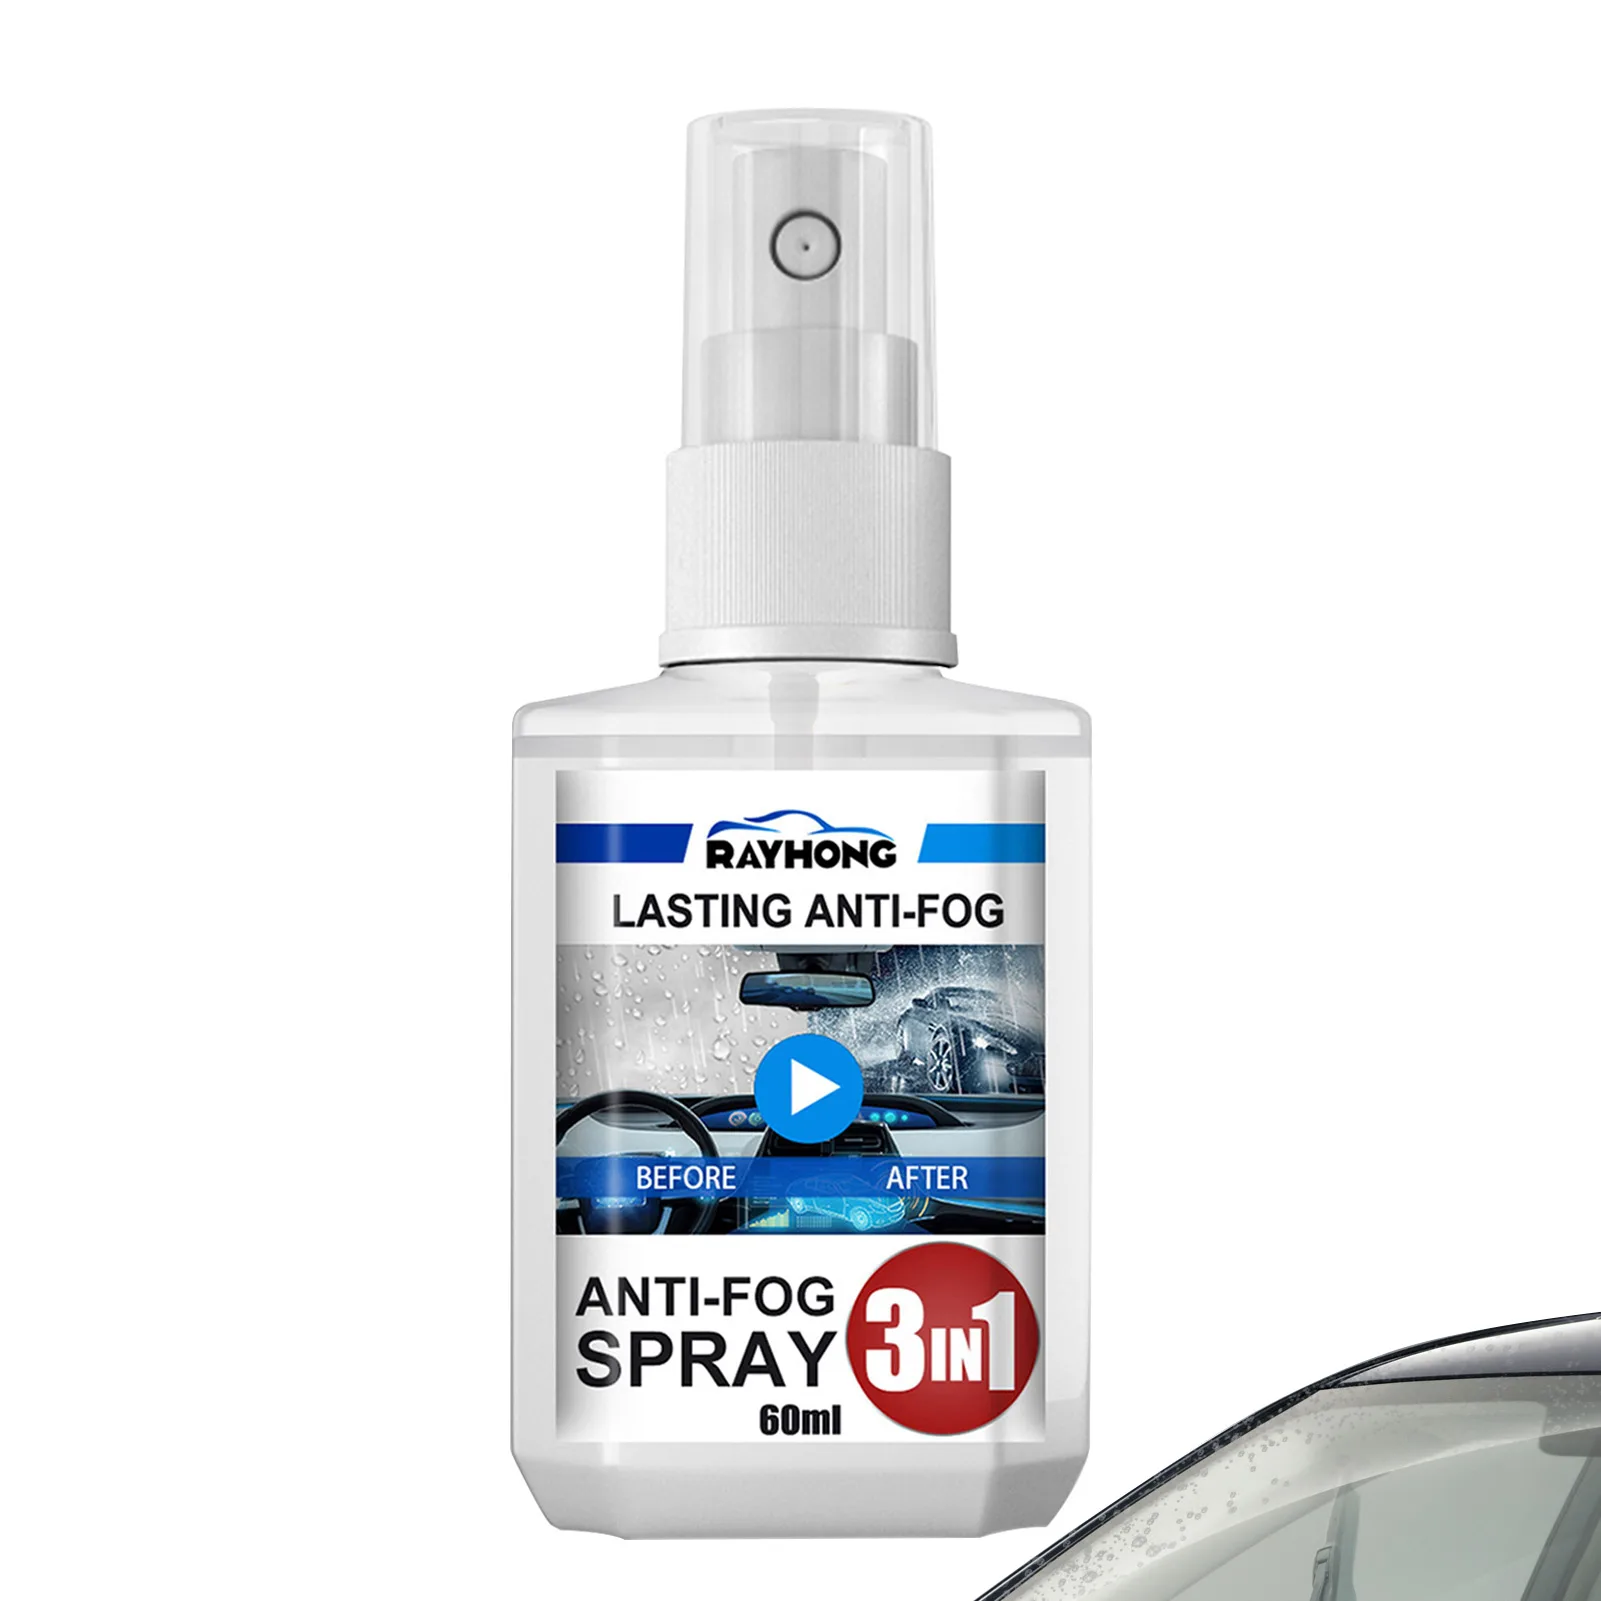 Anti-fog Agent 60ml Auto Defogger Agent Spray Car Window and Windshield Cleaner Prevents Fog on Windshield Glasses Lenses Goggle